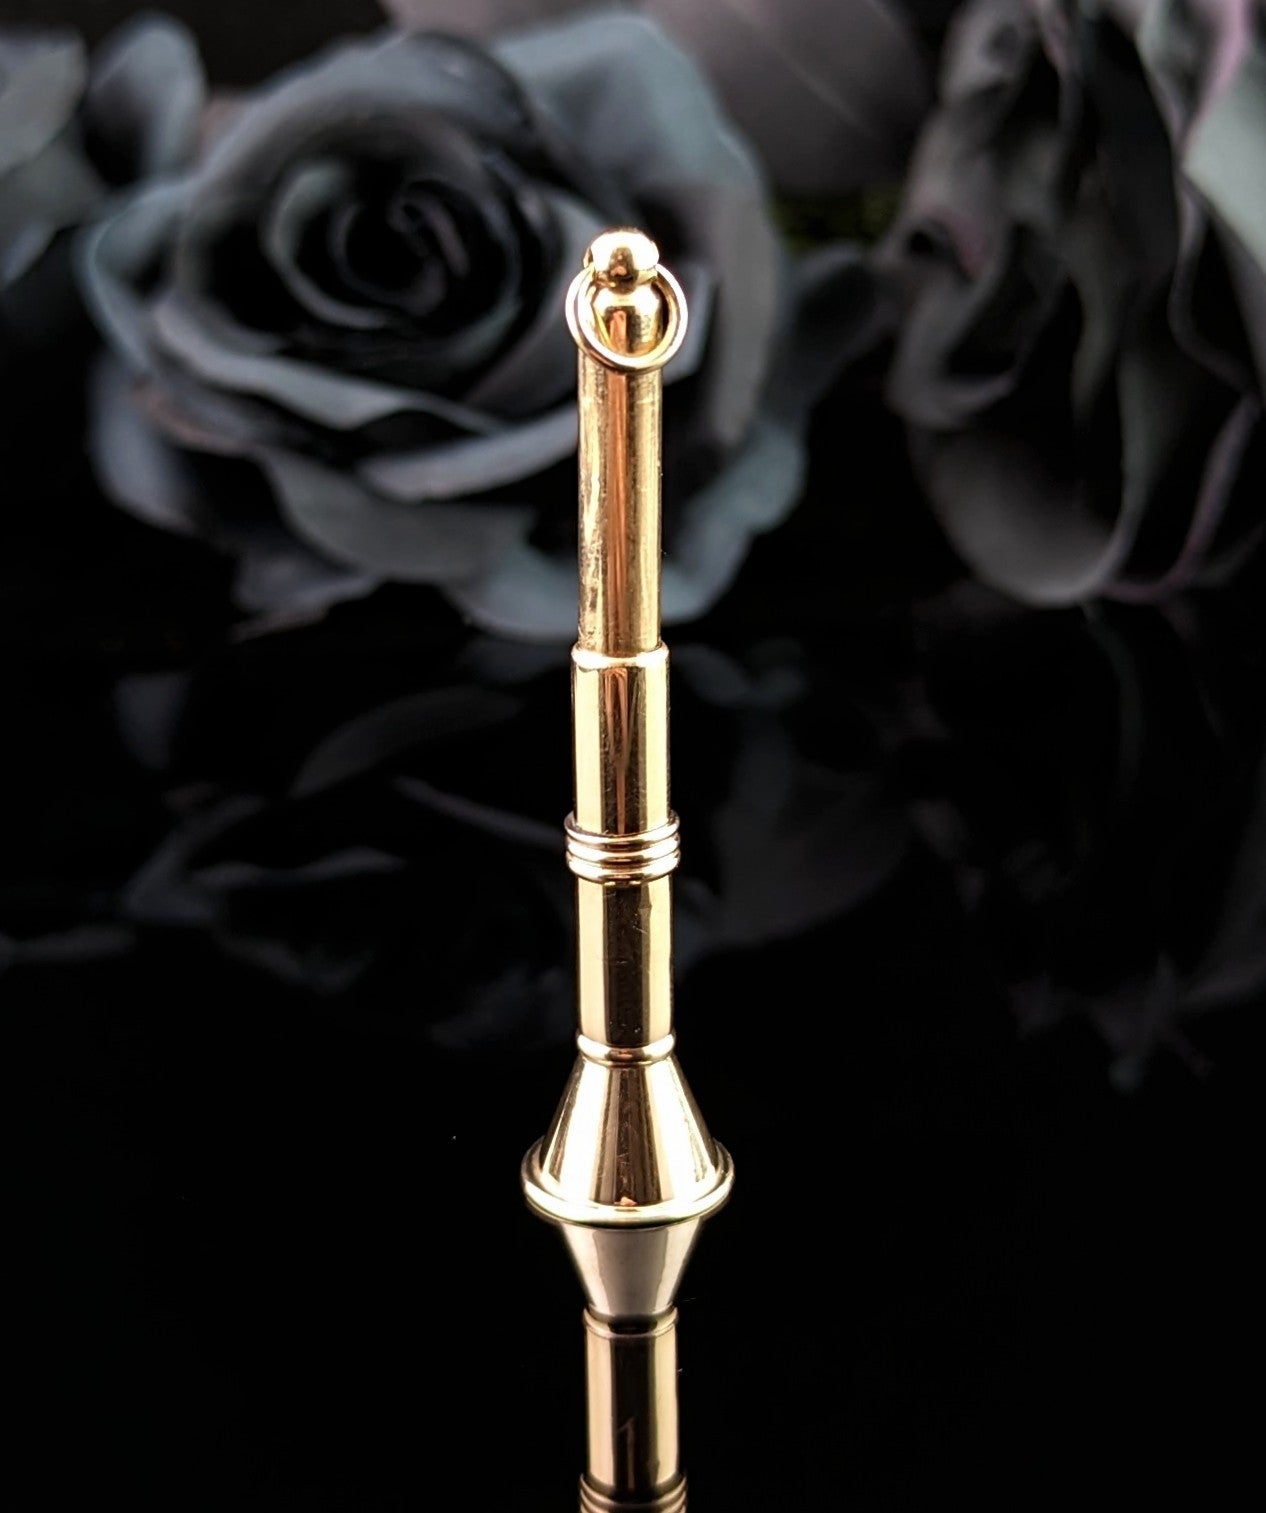 This fine vintage 9ct gold cigar piercer is the perfect functional piece of jewellery.

It would make a magnificent gift for the cigar lover or an interesting addition to a nice antique gold Albert chain.

It is a gorgeous piece, created in the late